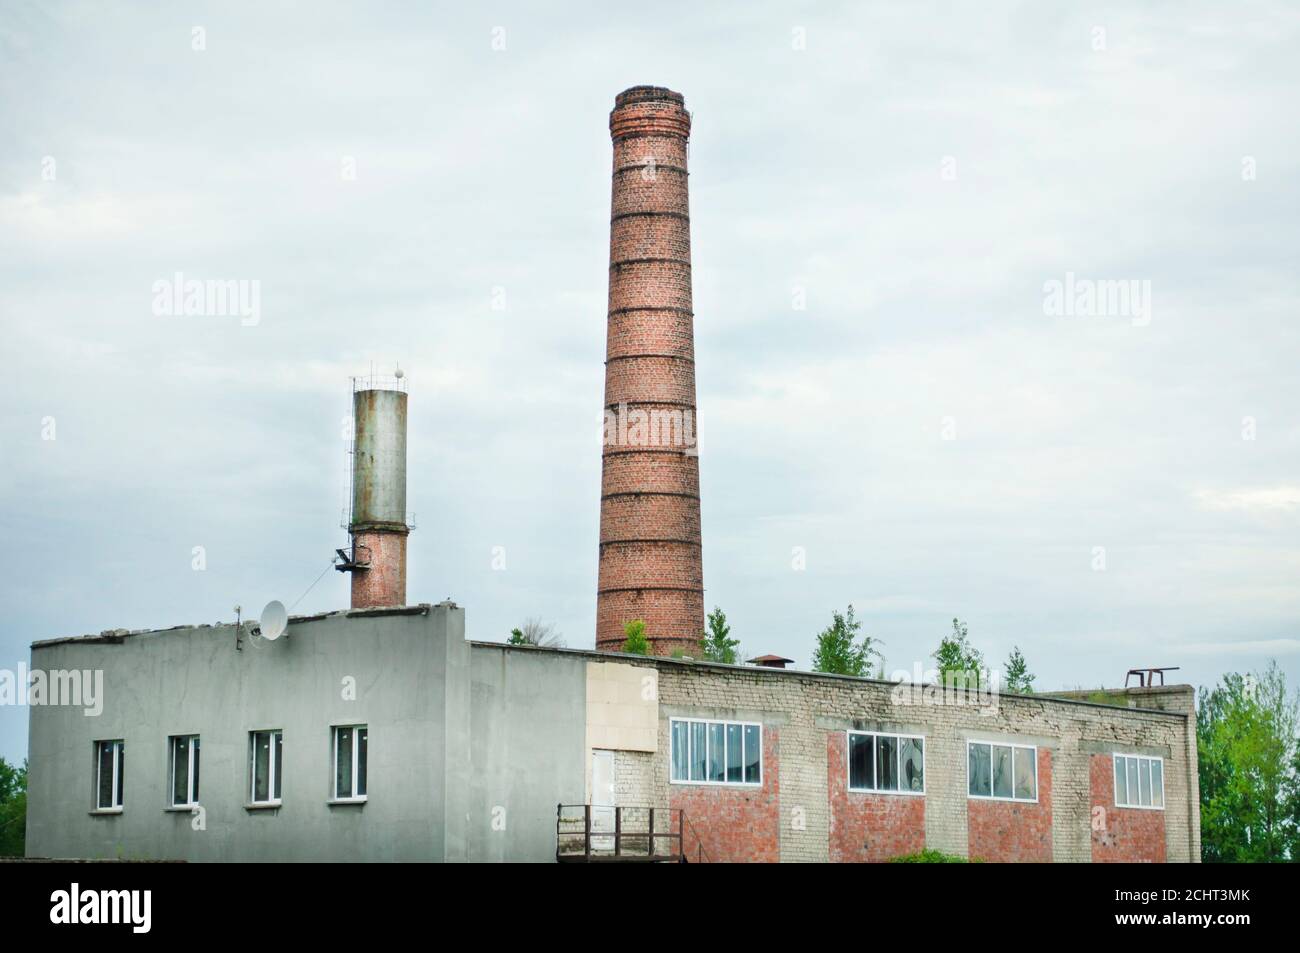 Old factory building, old brick pipes from the boiler room, young trees on the roof, but with fiberglass windows Stock Photo